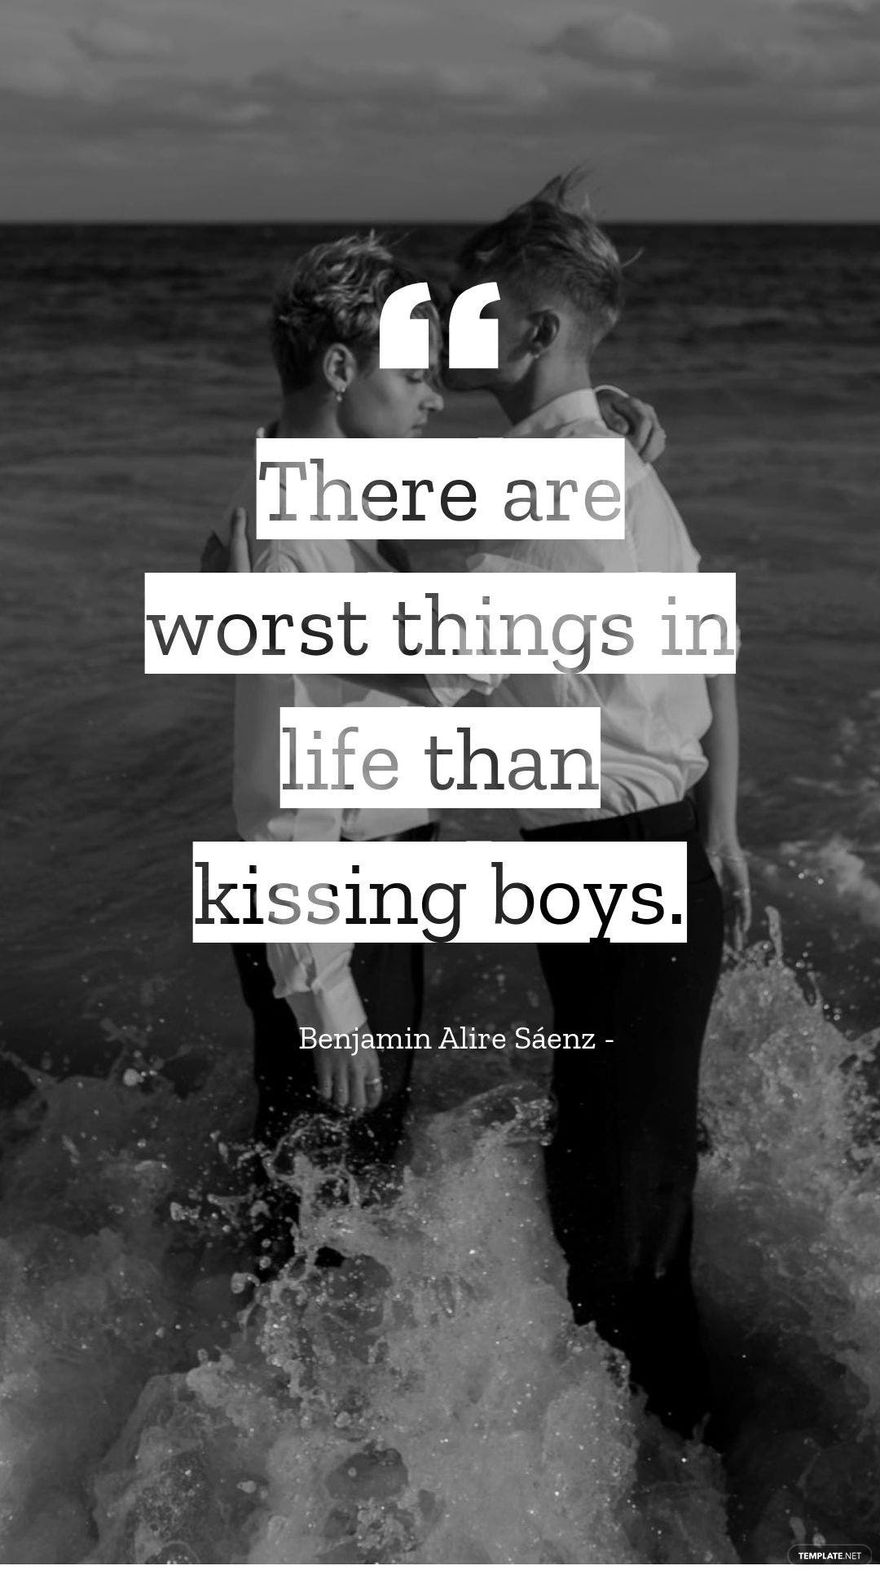 Free Benjamin Alire Sáenz - There are worst things in life than kissing boys.